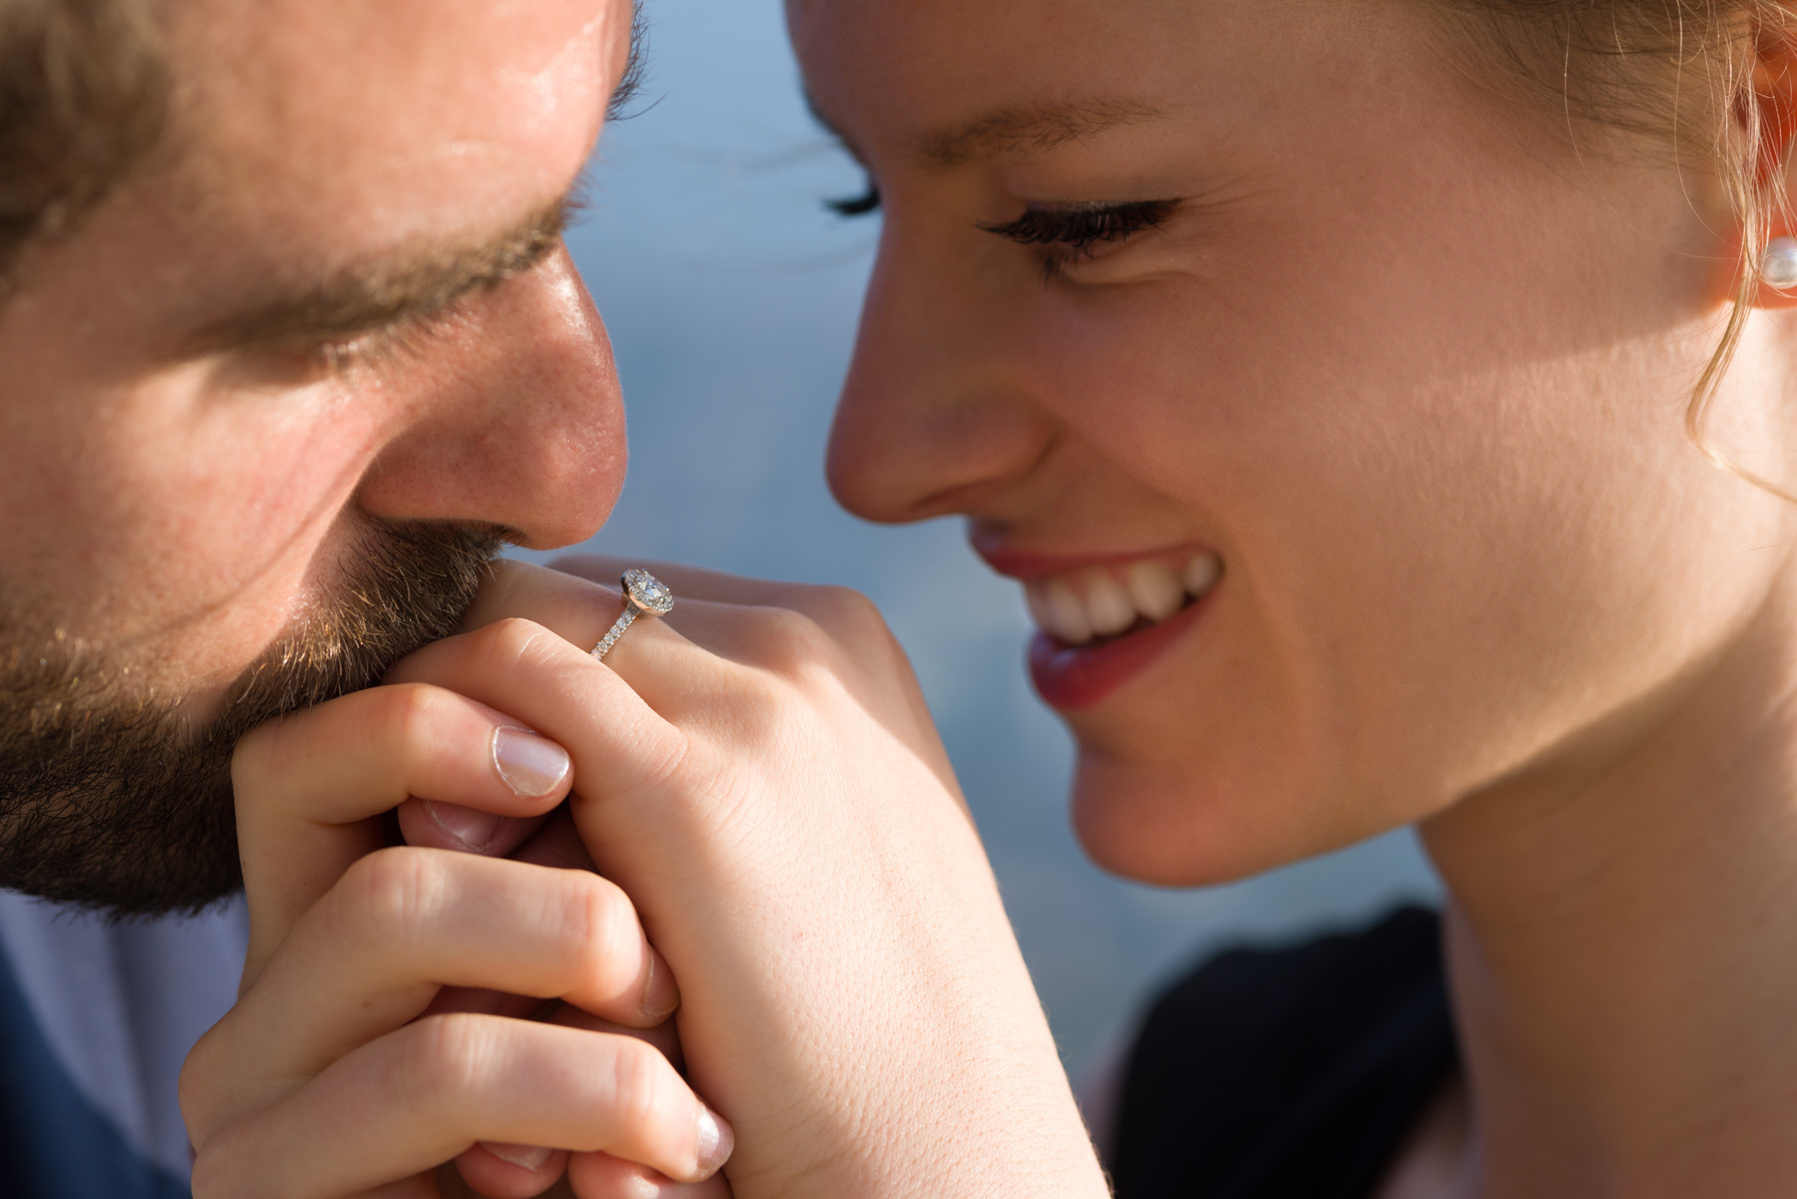 Close-up engagement photo showing the couples happiness and of course, the ring!